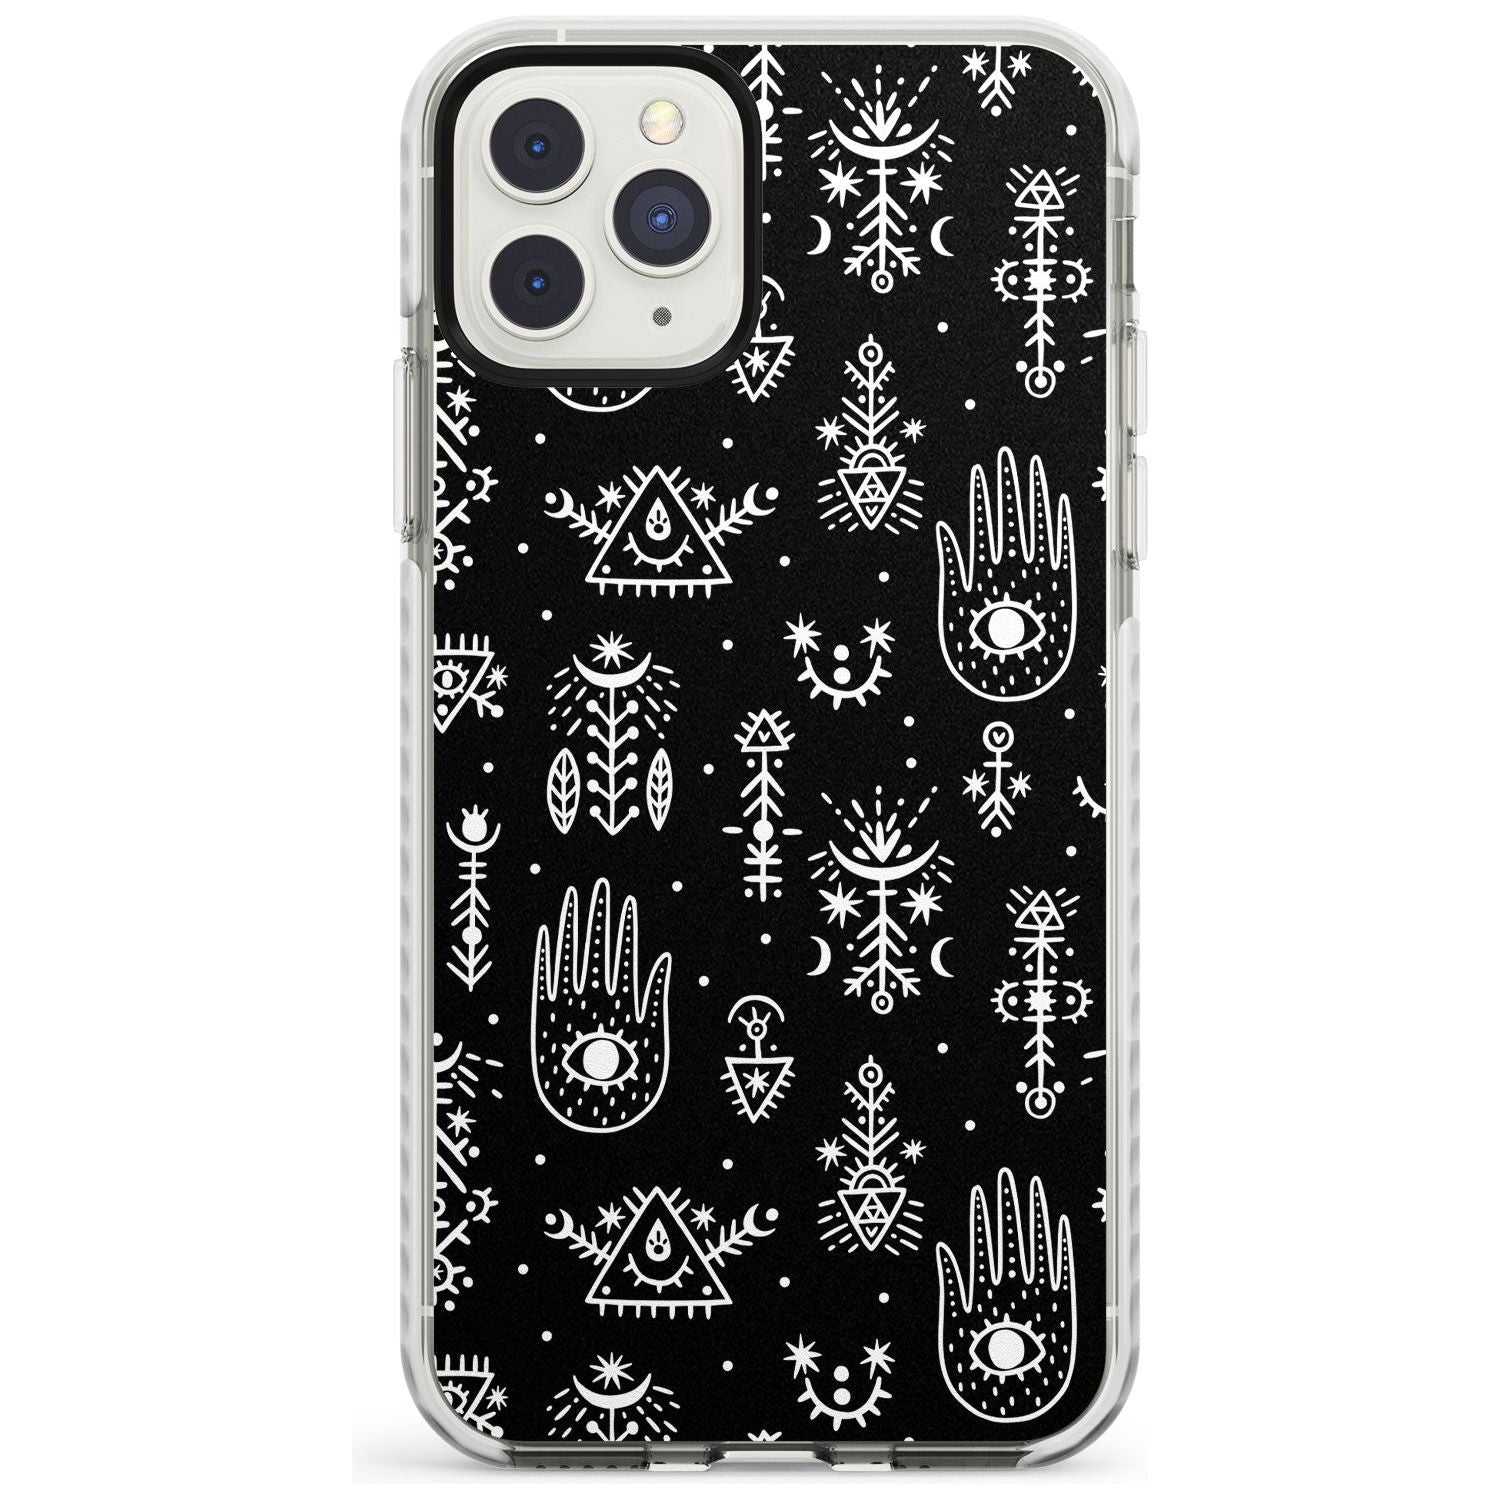 Tribal Palms - White on Black Impact Phone Case for iPhone 11 Pro Max